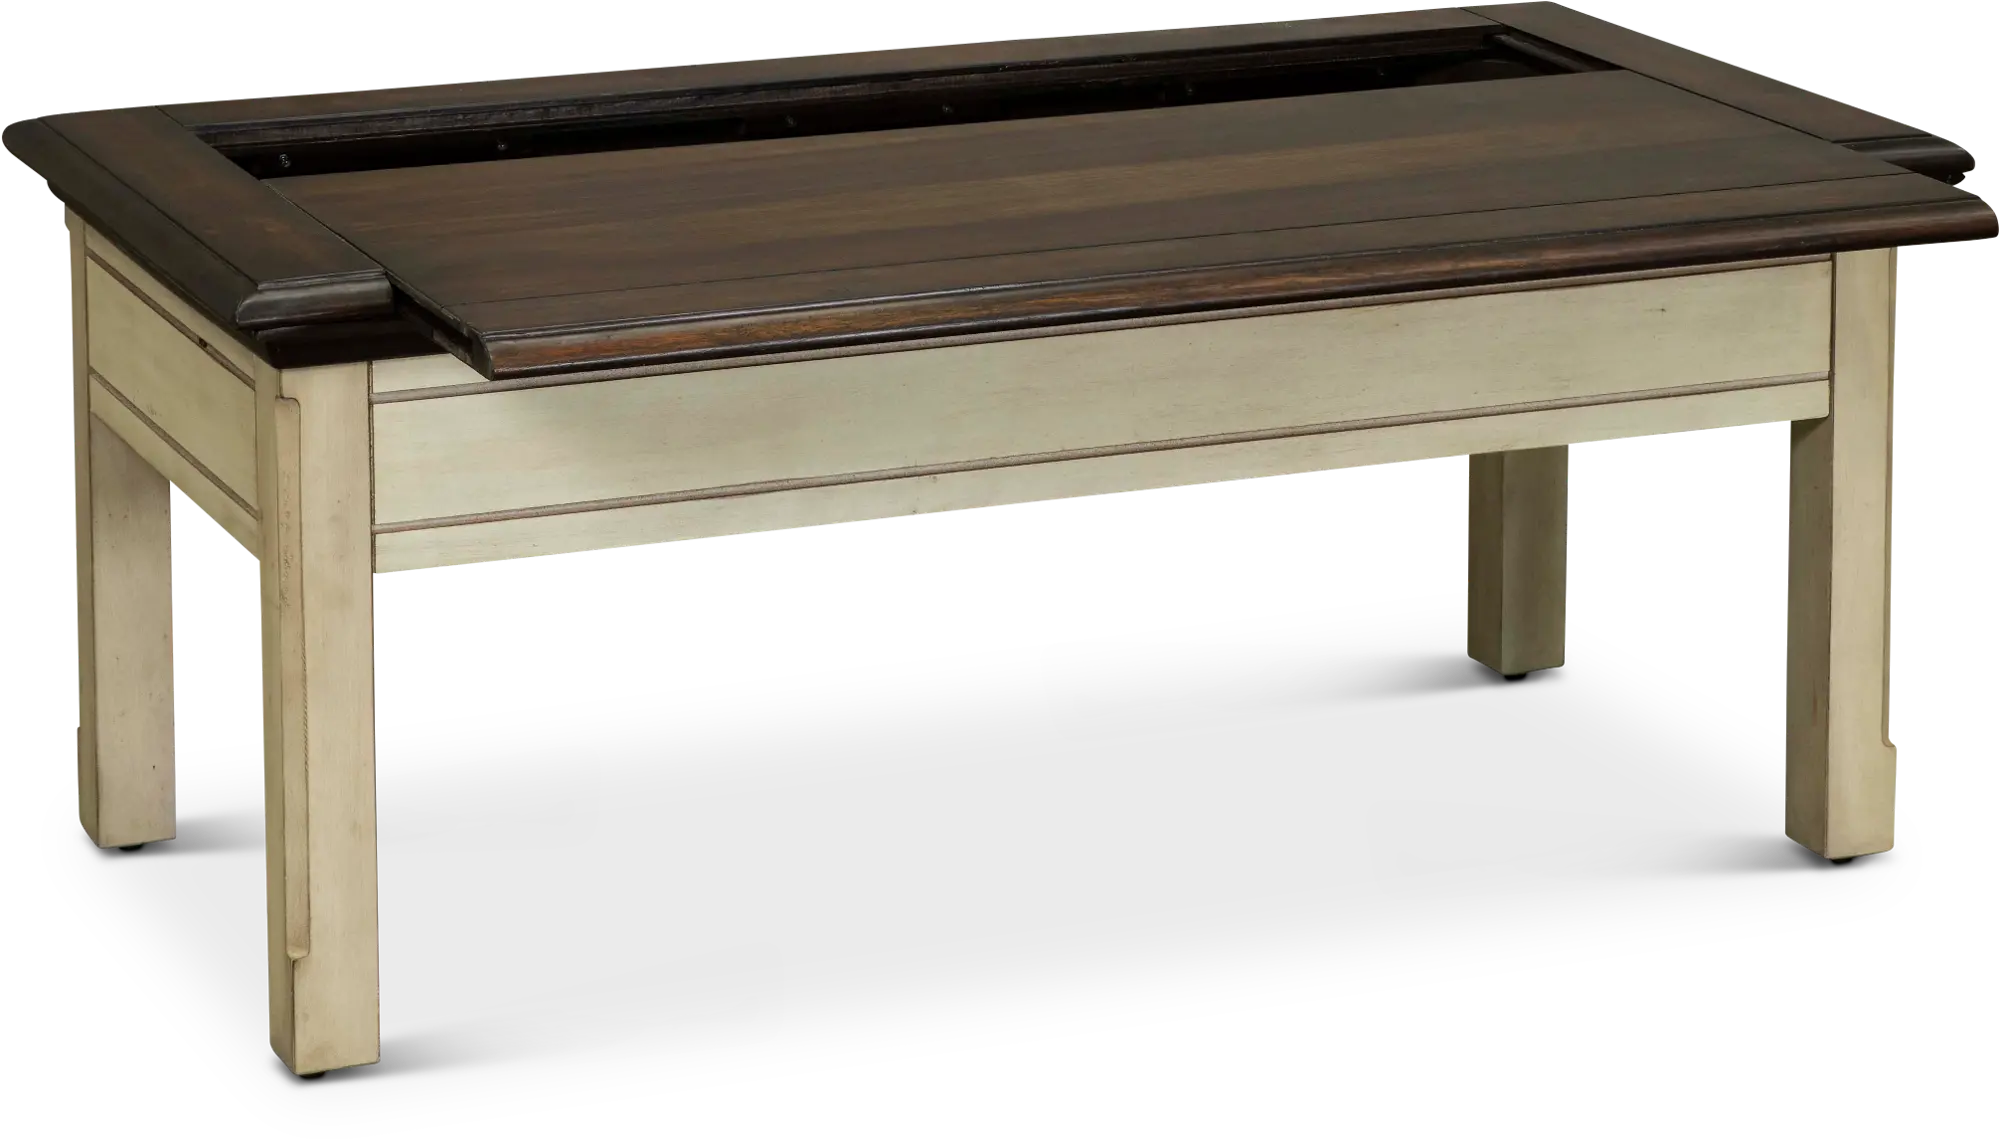 Sutter Creek Cream and Brown Slide-Top Coffee Table